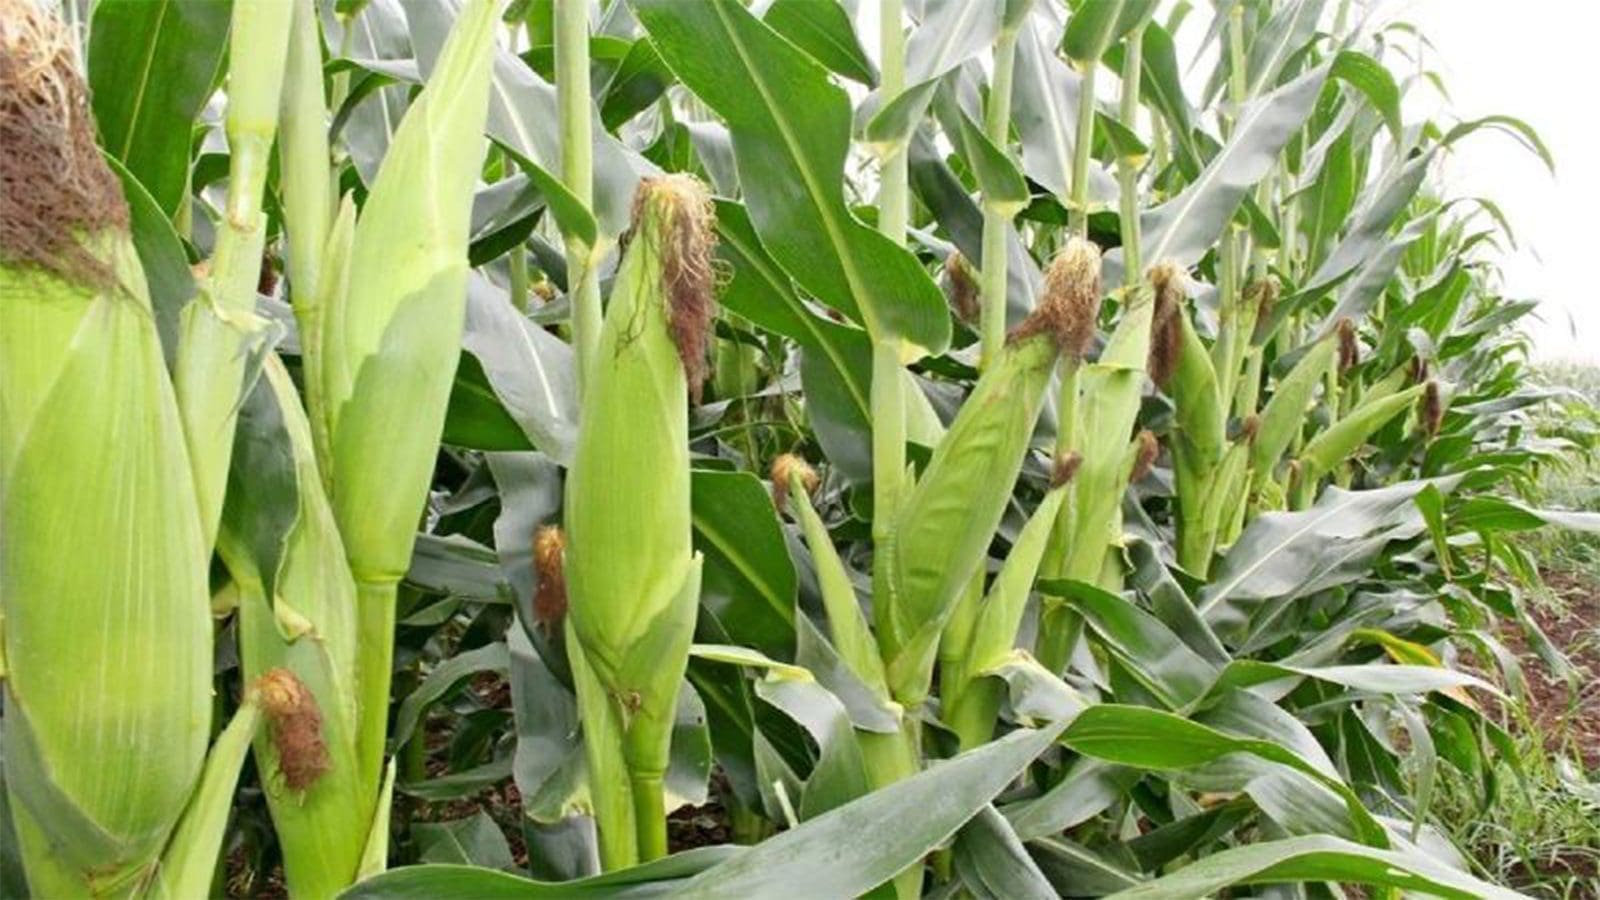 Hope for Kenya as maize farmers anticipate bountiful harvests on the back of subsidized inputs